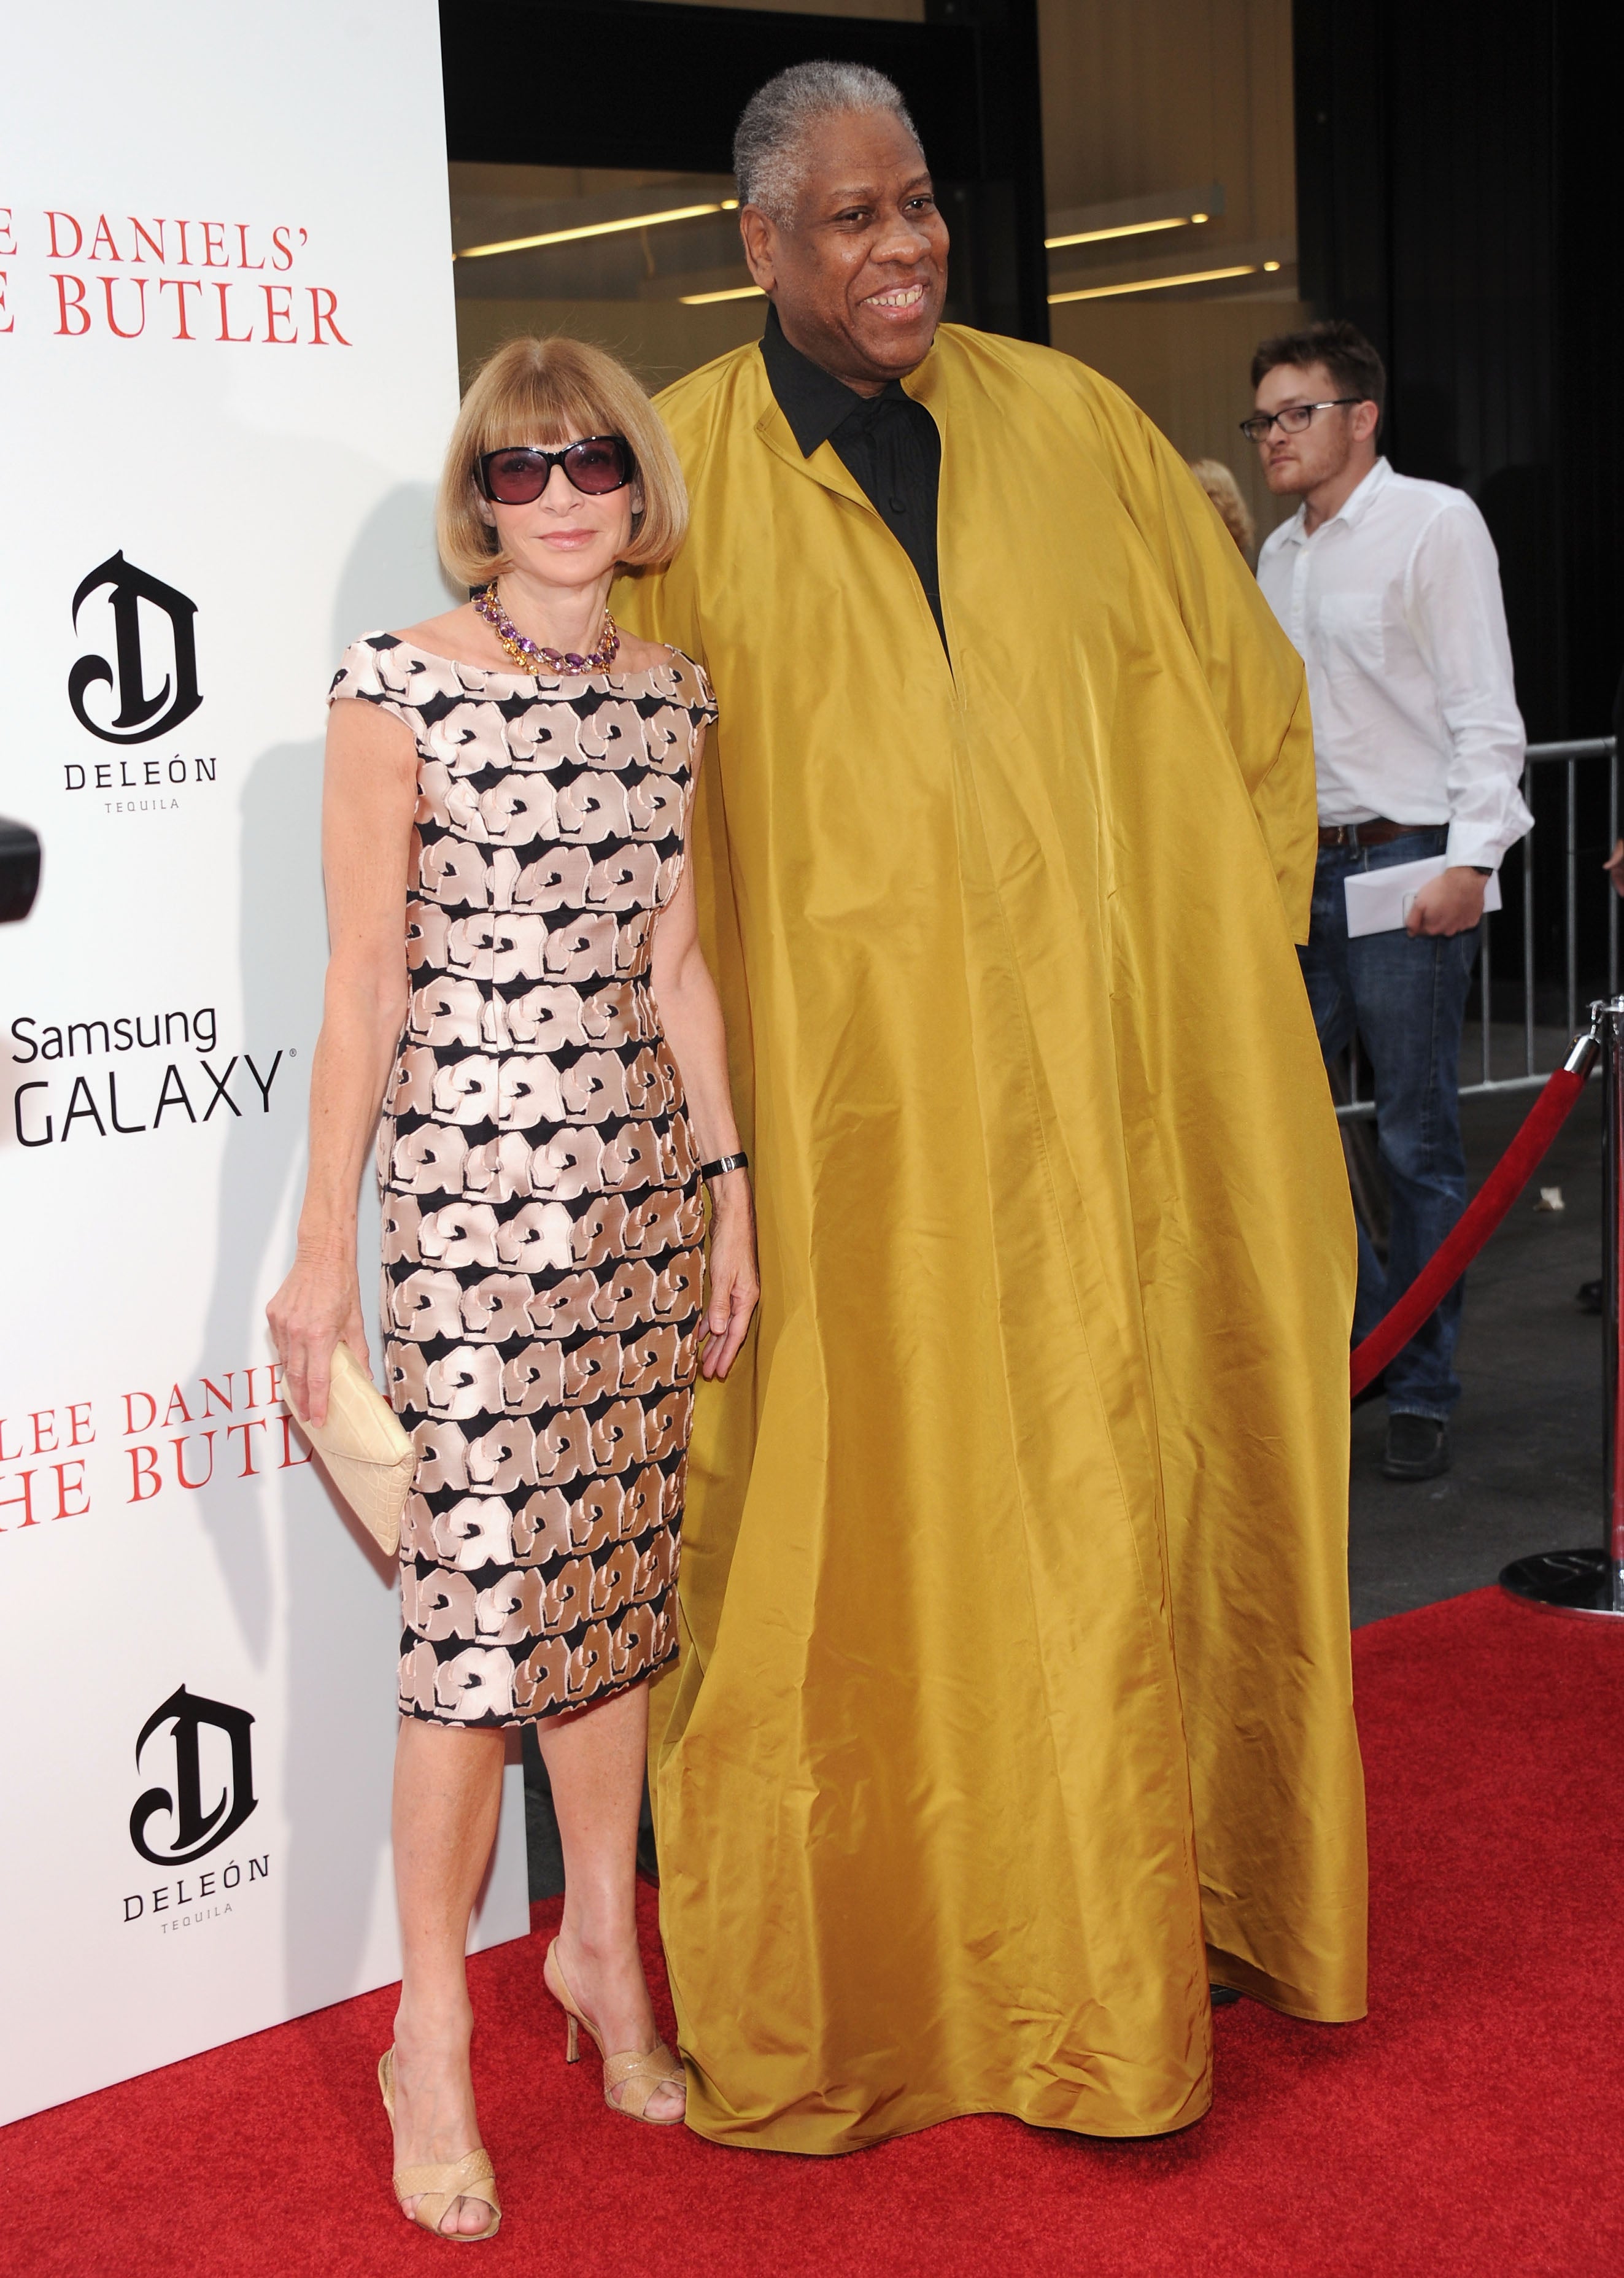 Talley pictured with Anna Wintour at a New York film premiere in 2013